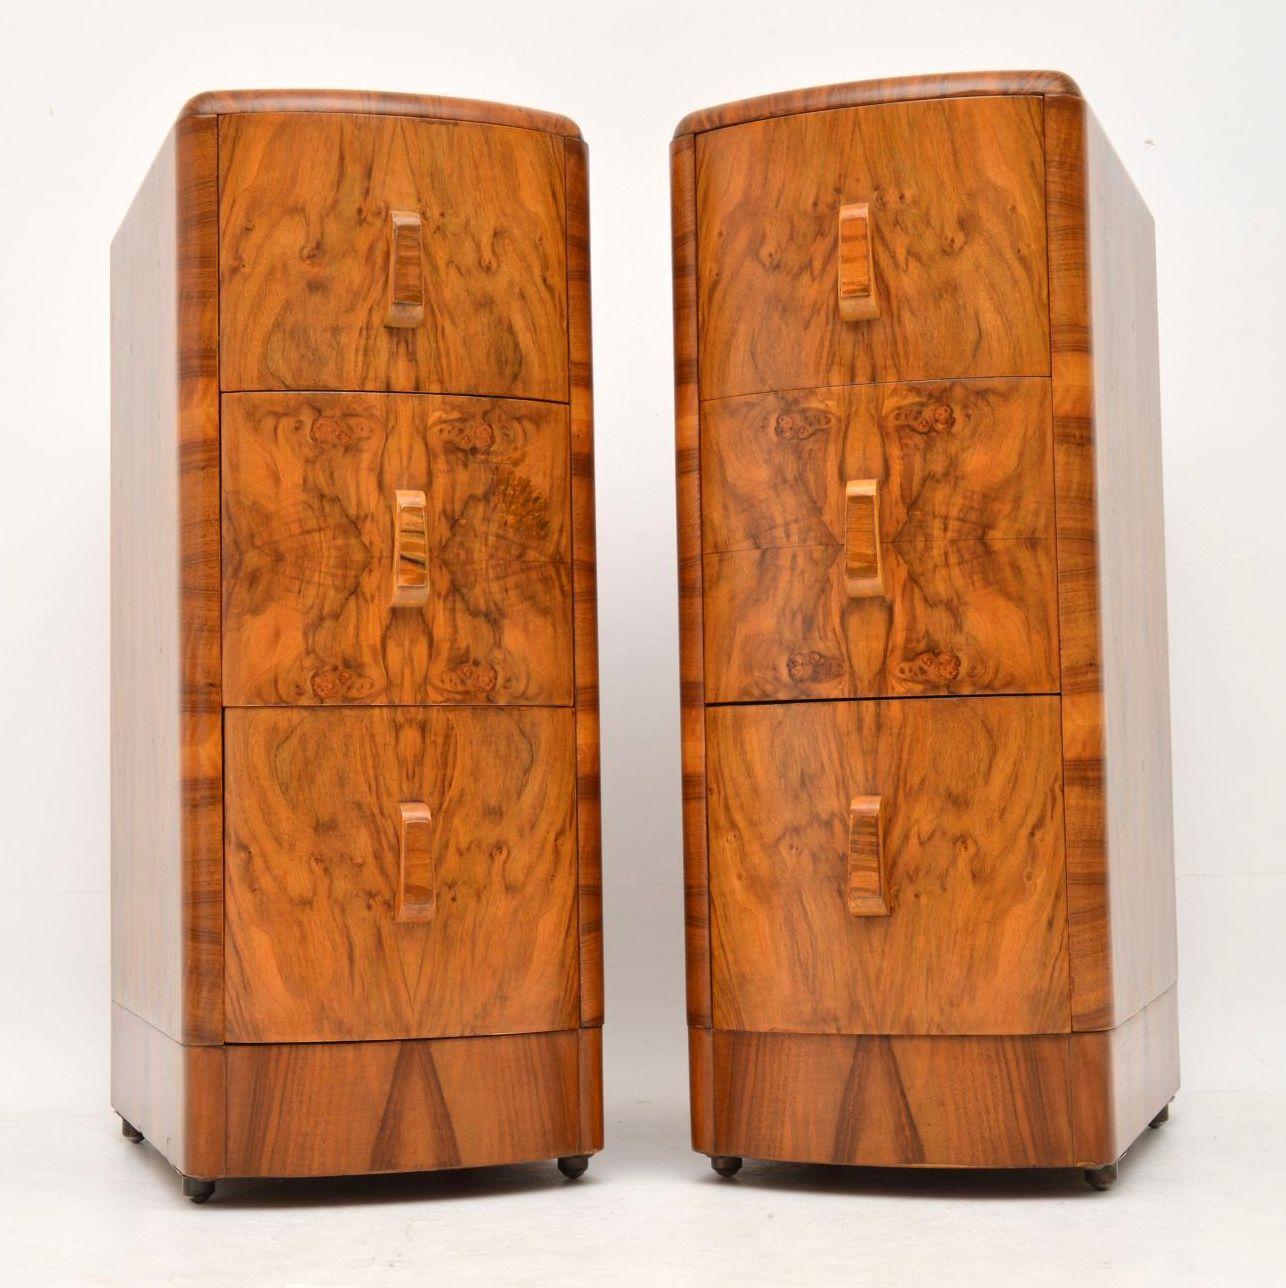 A stunning pair of original Art Deco period bedside chests in walnut, these date from the 1920s-1930s. They are a great size, very tall and deep, with lots of storage space. We have had these stripped and re-polished to a very high standard, the